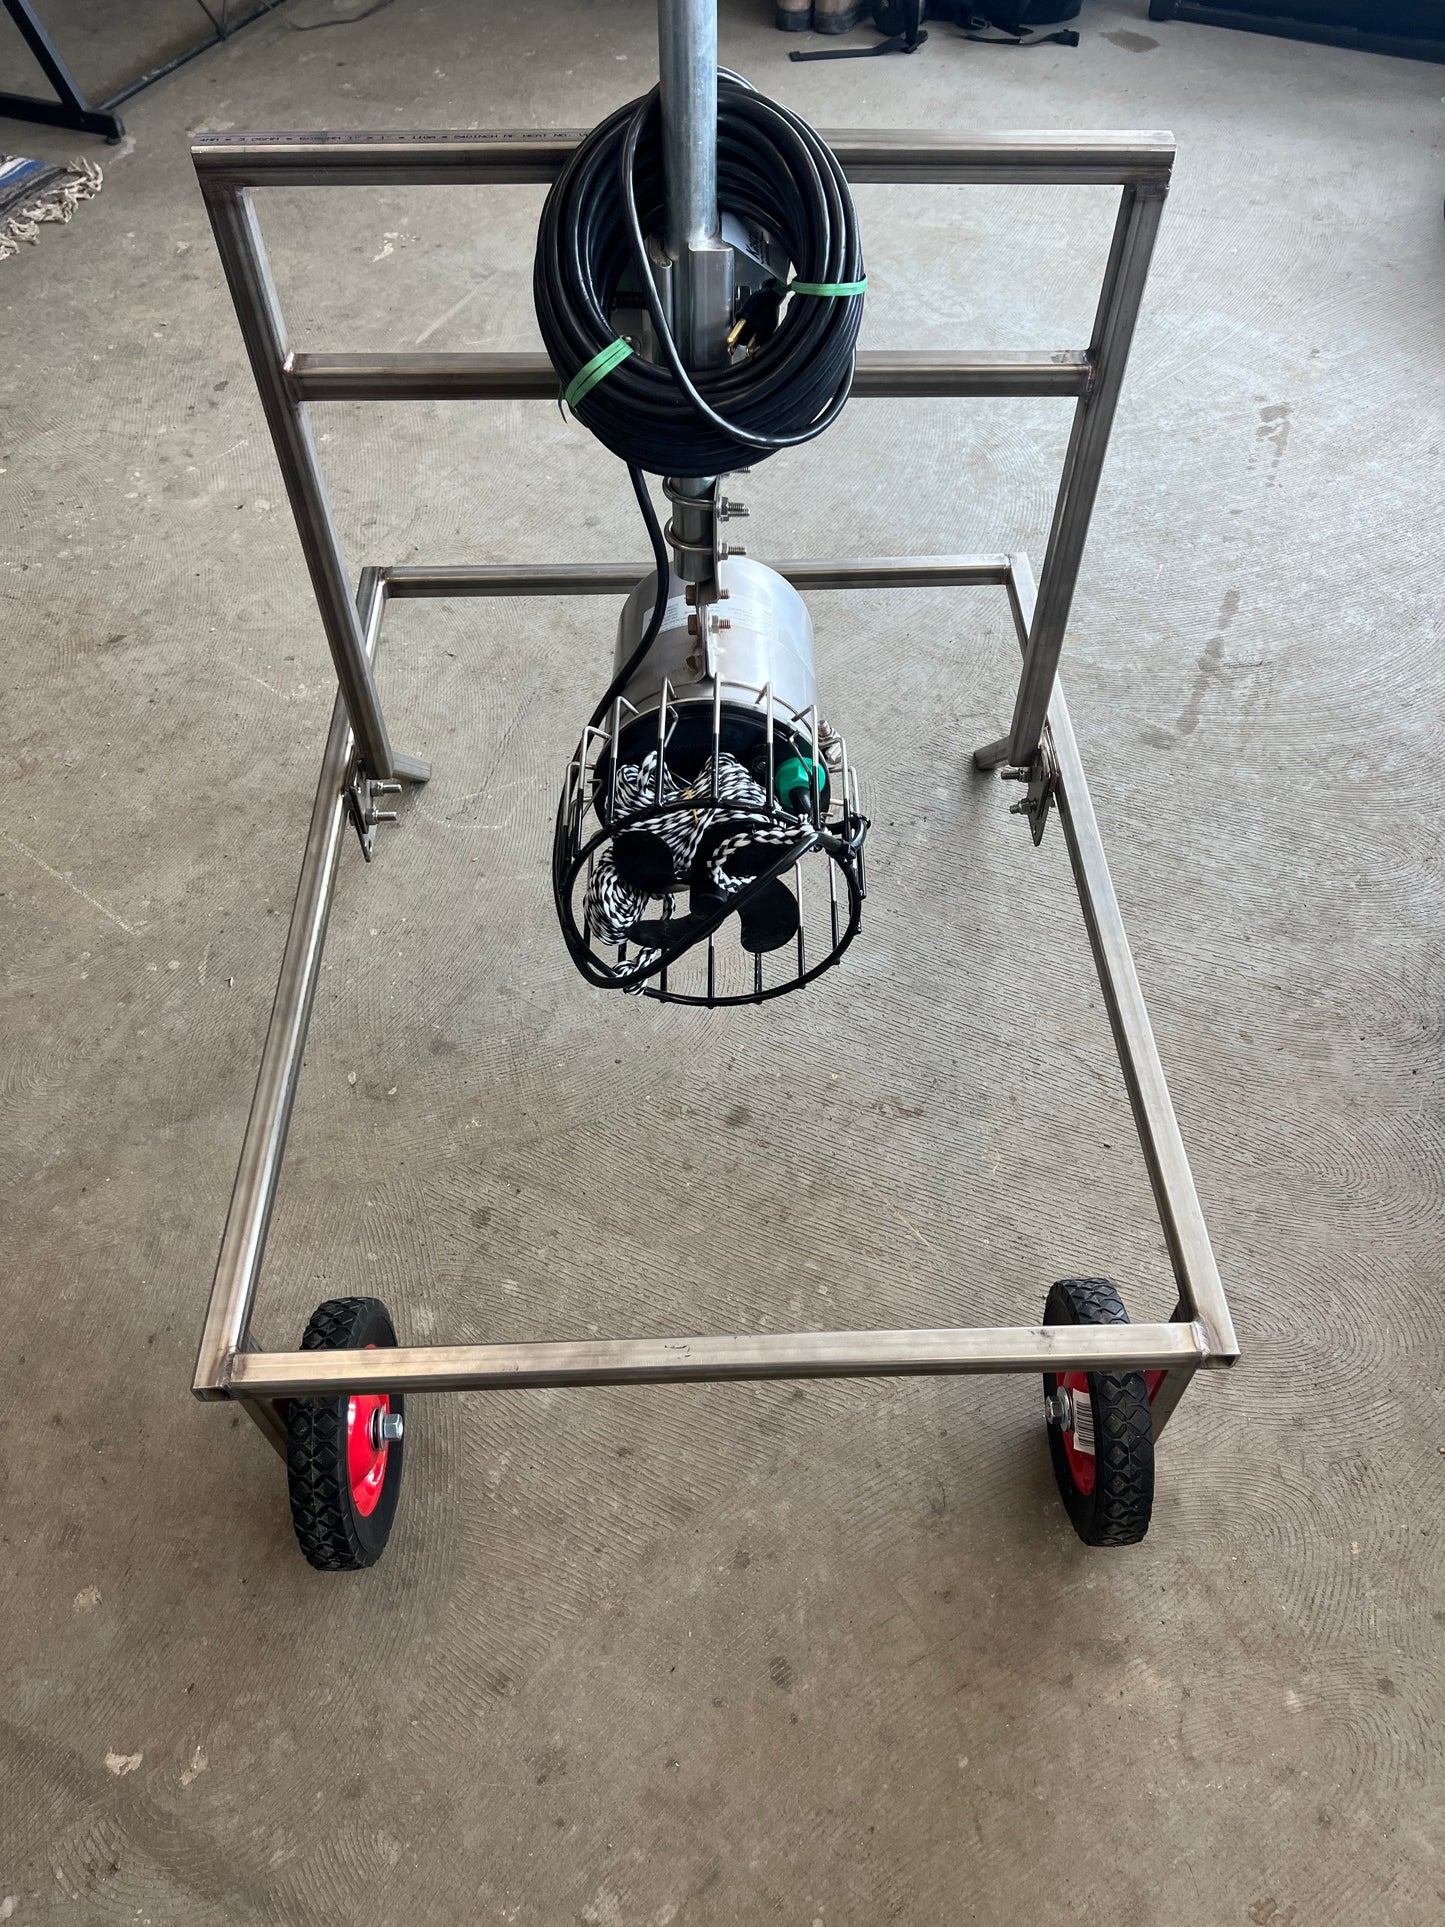 Aquatic Moveable Stand C/W Kasco Deicer/Thruster